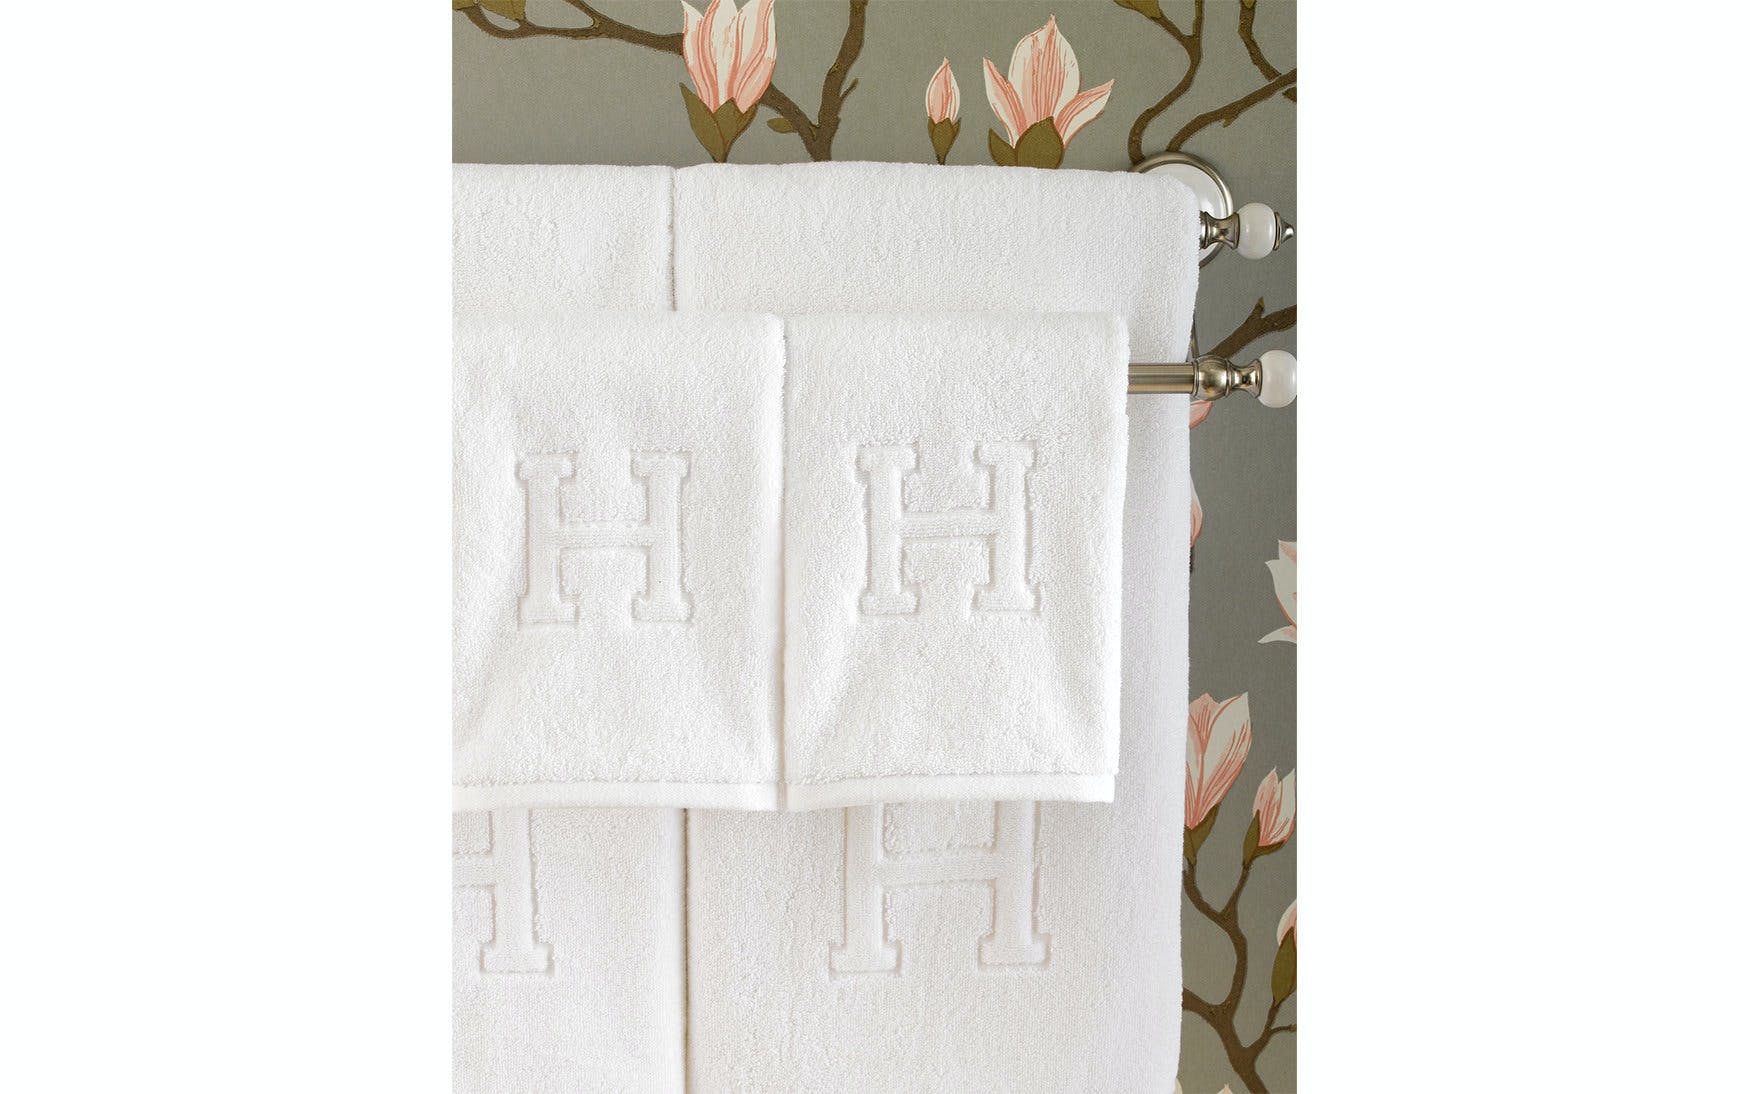 Matouk Marcus Collection Luxury Hand Towel, Pool, Bath Towels & Bath Rugs Hand Towels